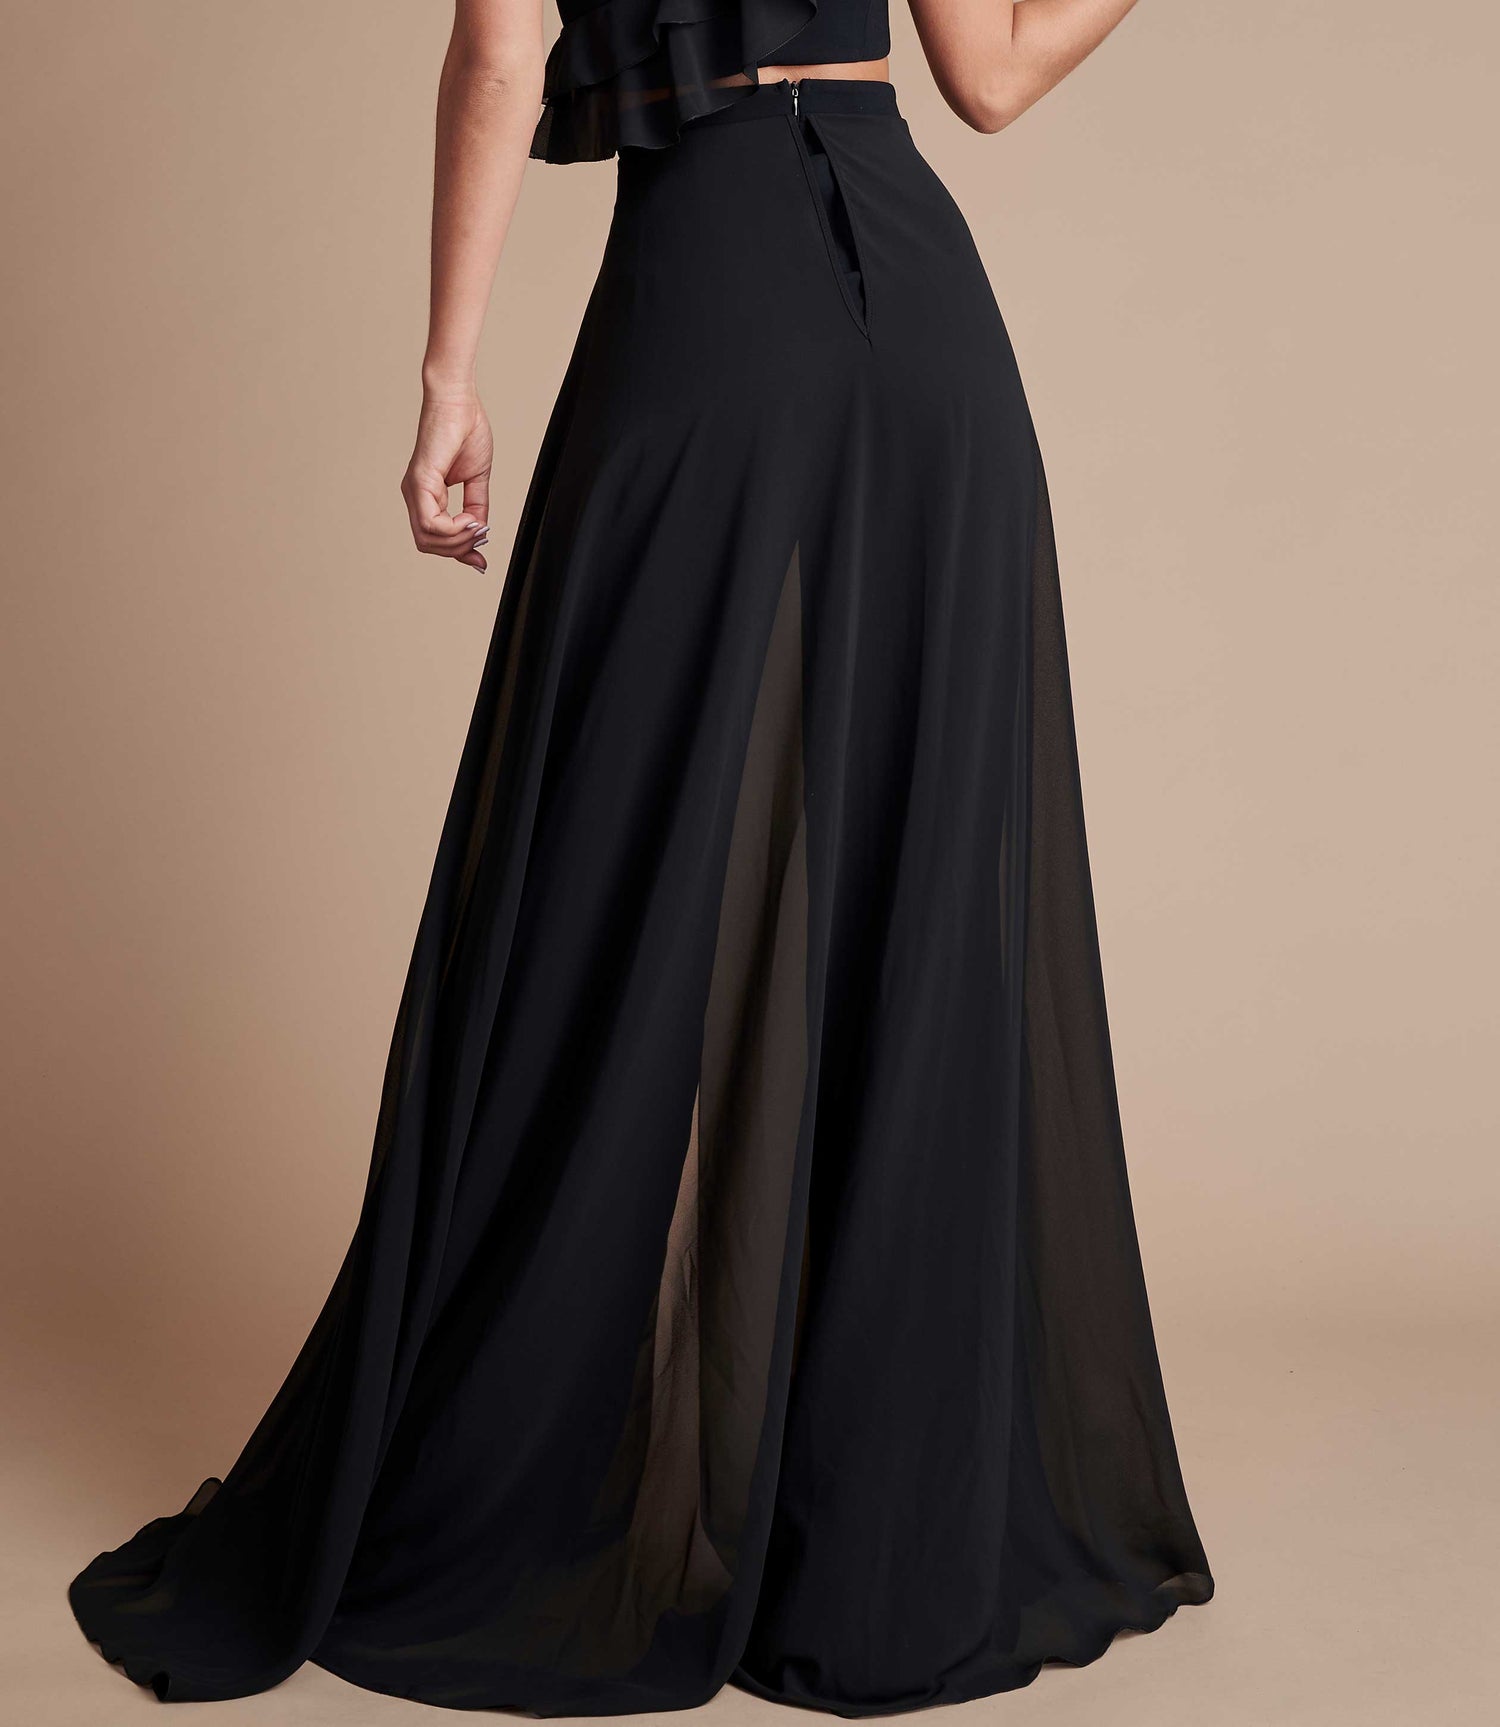 Black high-waisted wide leg trouser with floaty chiffon.